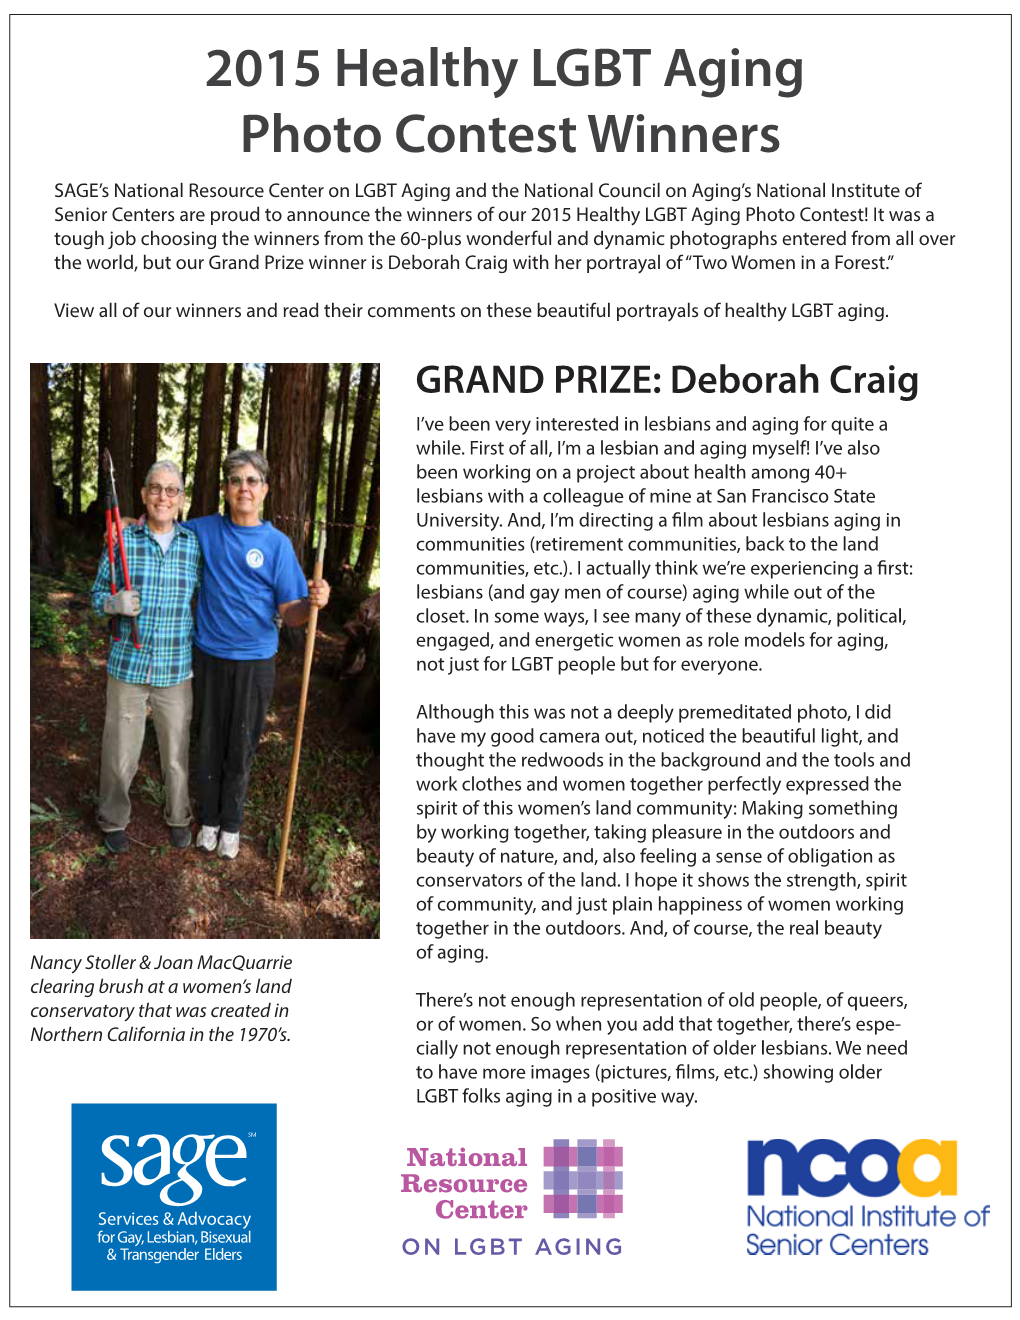 2015 Healthy LGBT Aging Photo Contest Winners